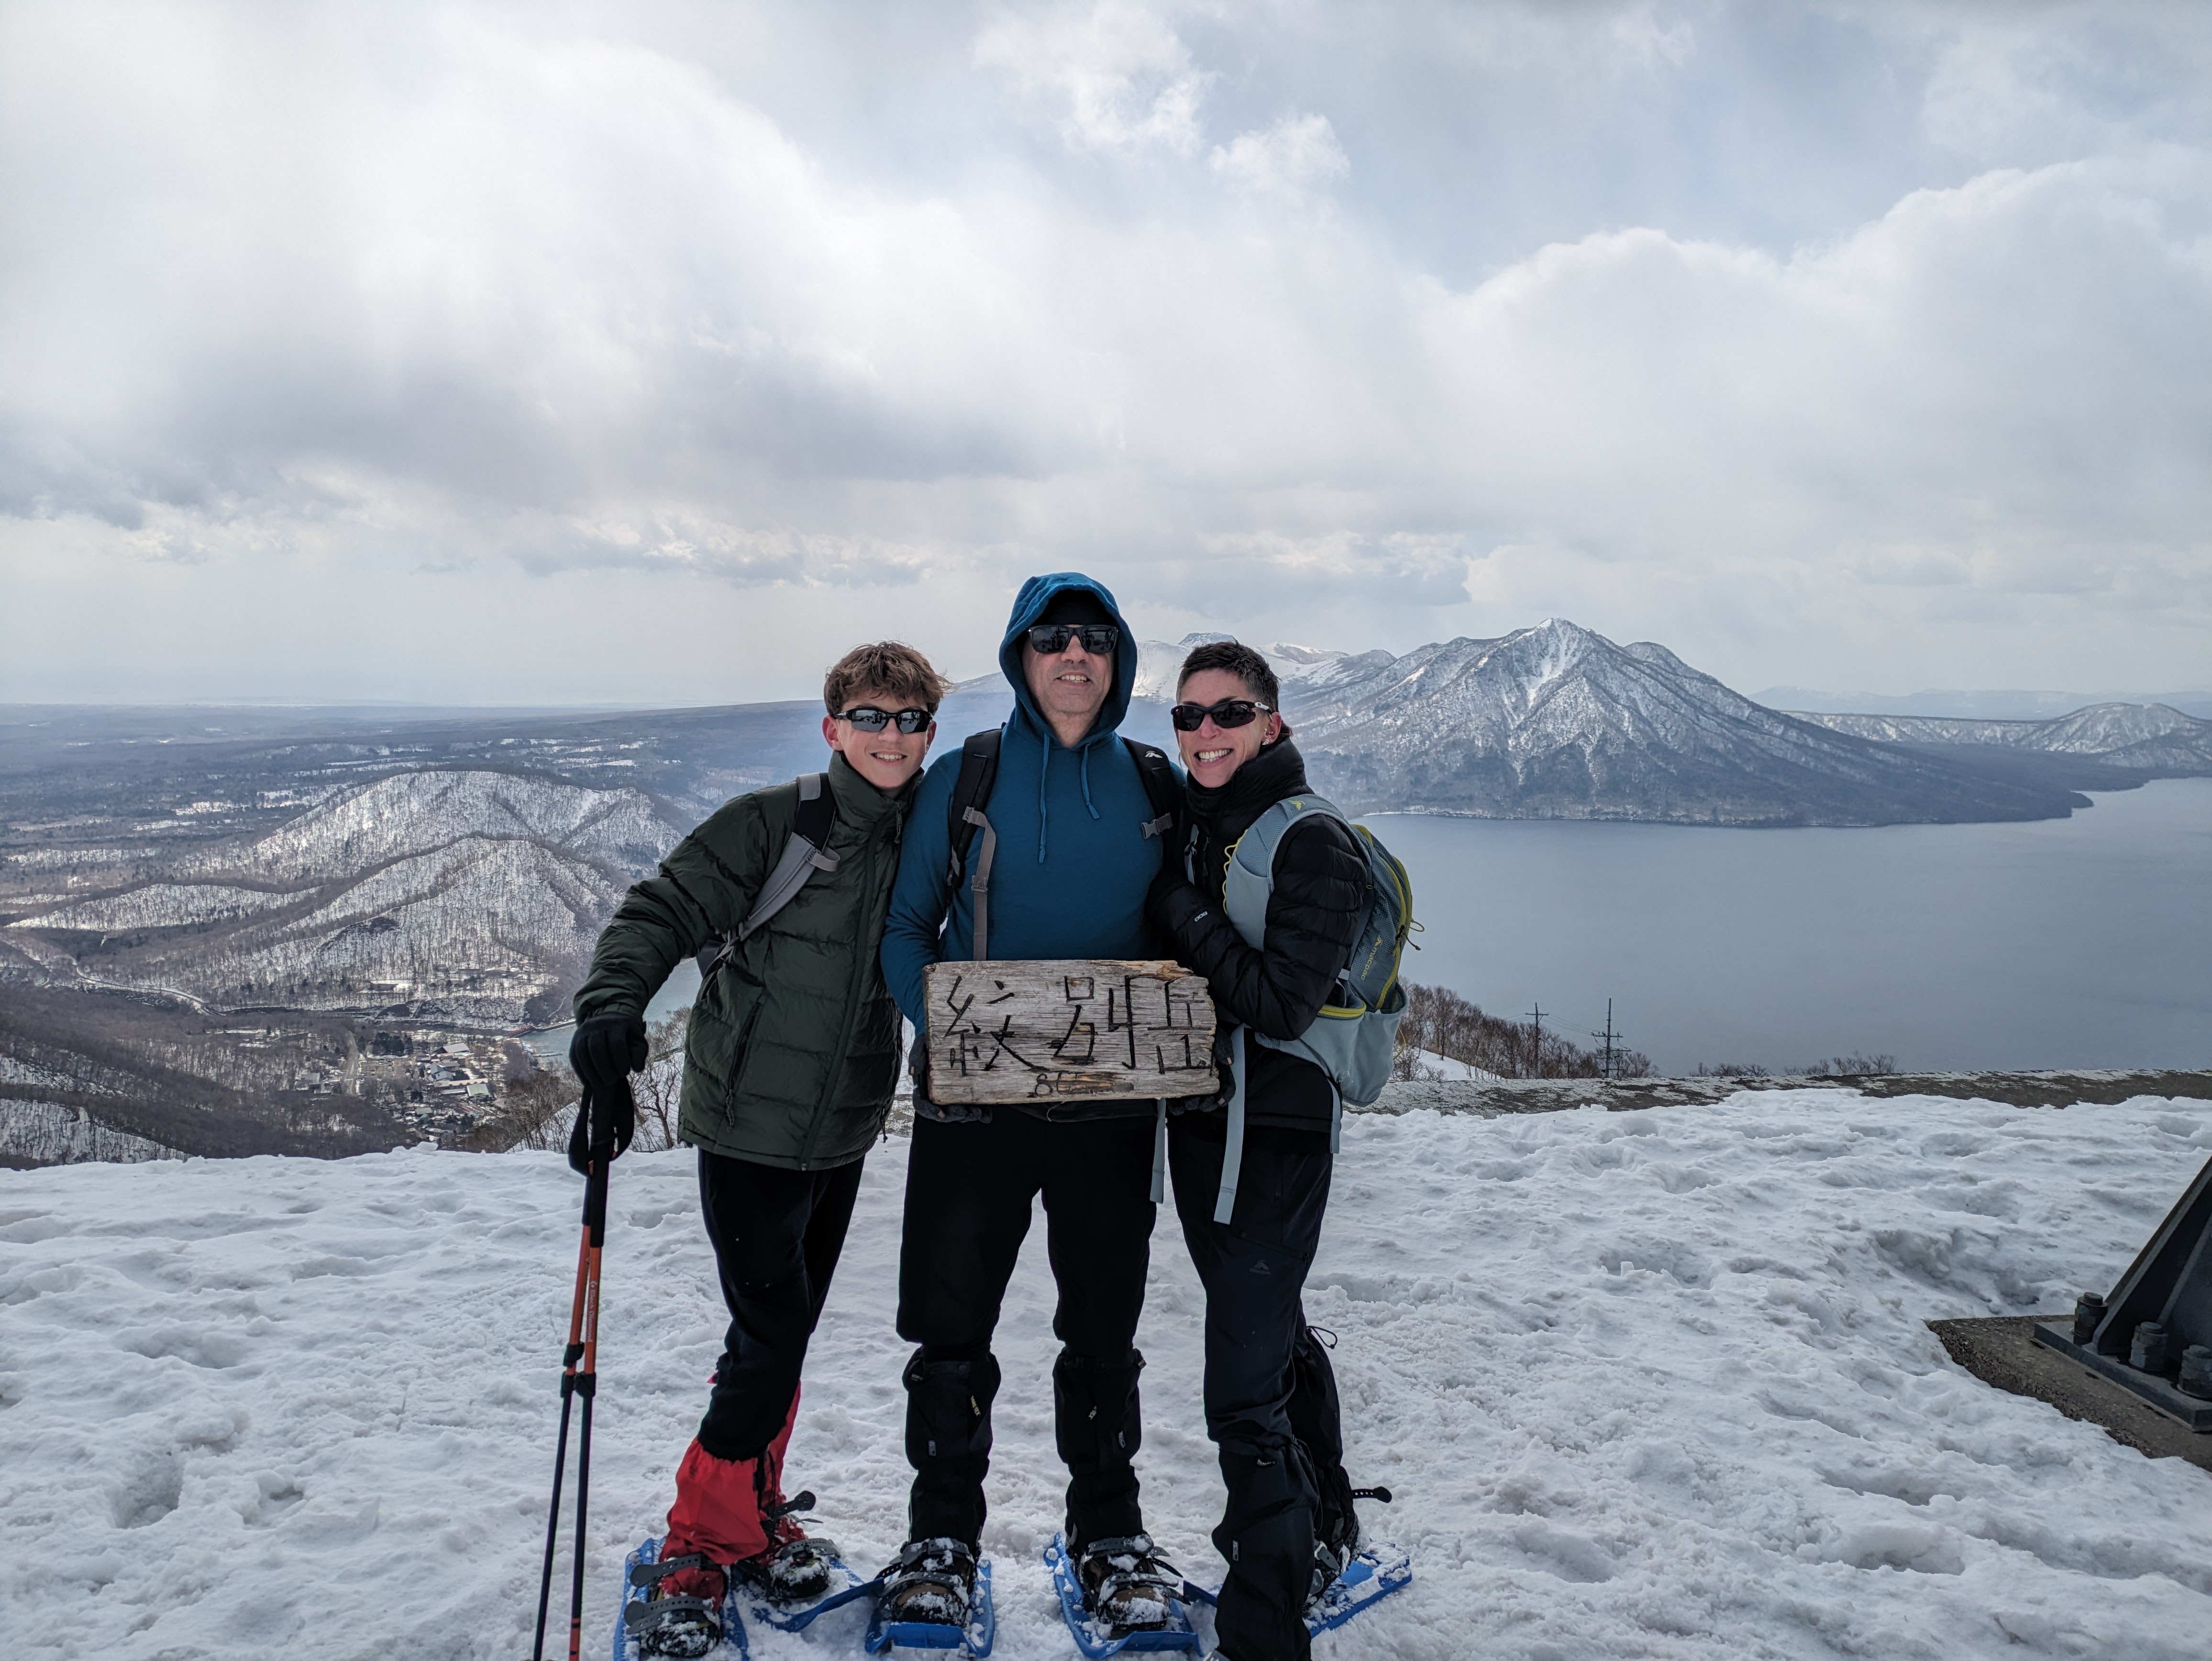 Three guests pose triumphantly at the top of Mt. Mobetsu, holding the summit sign which shows elevation.